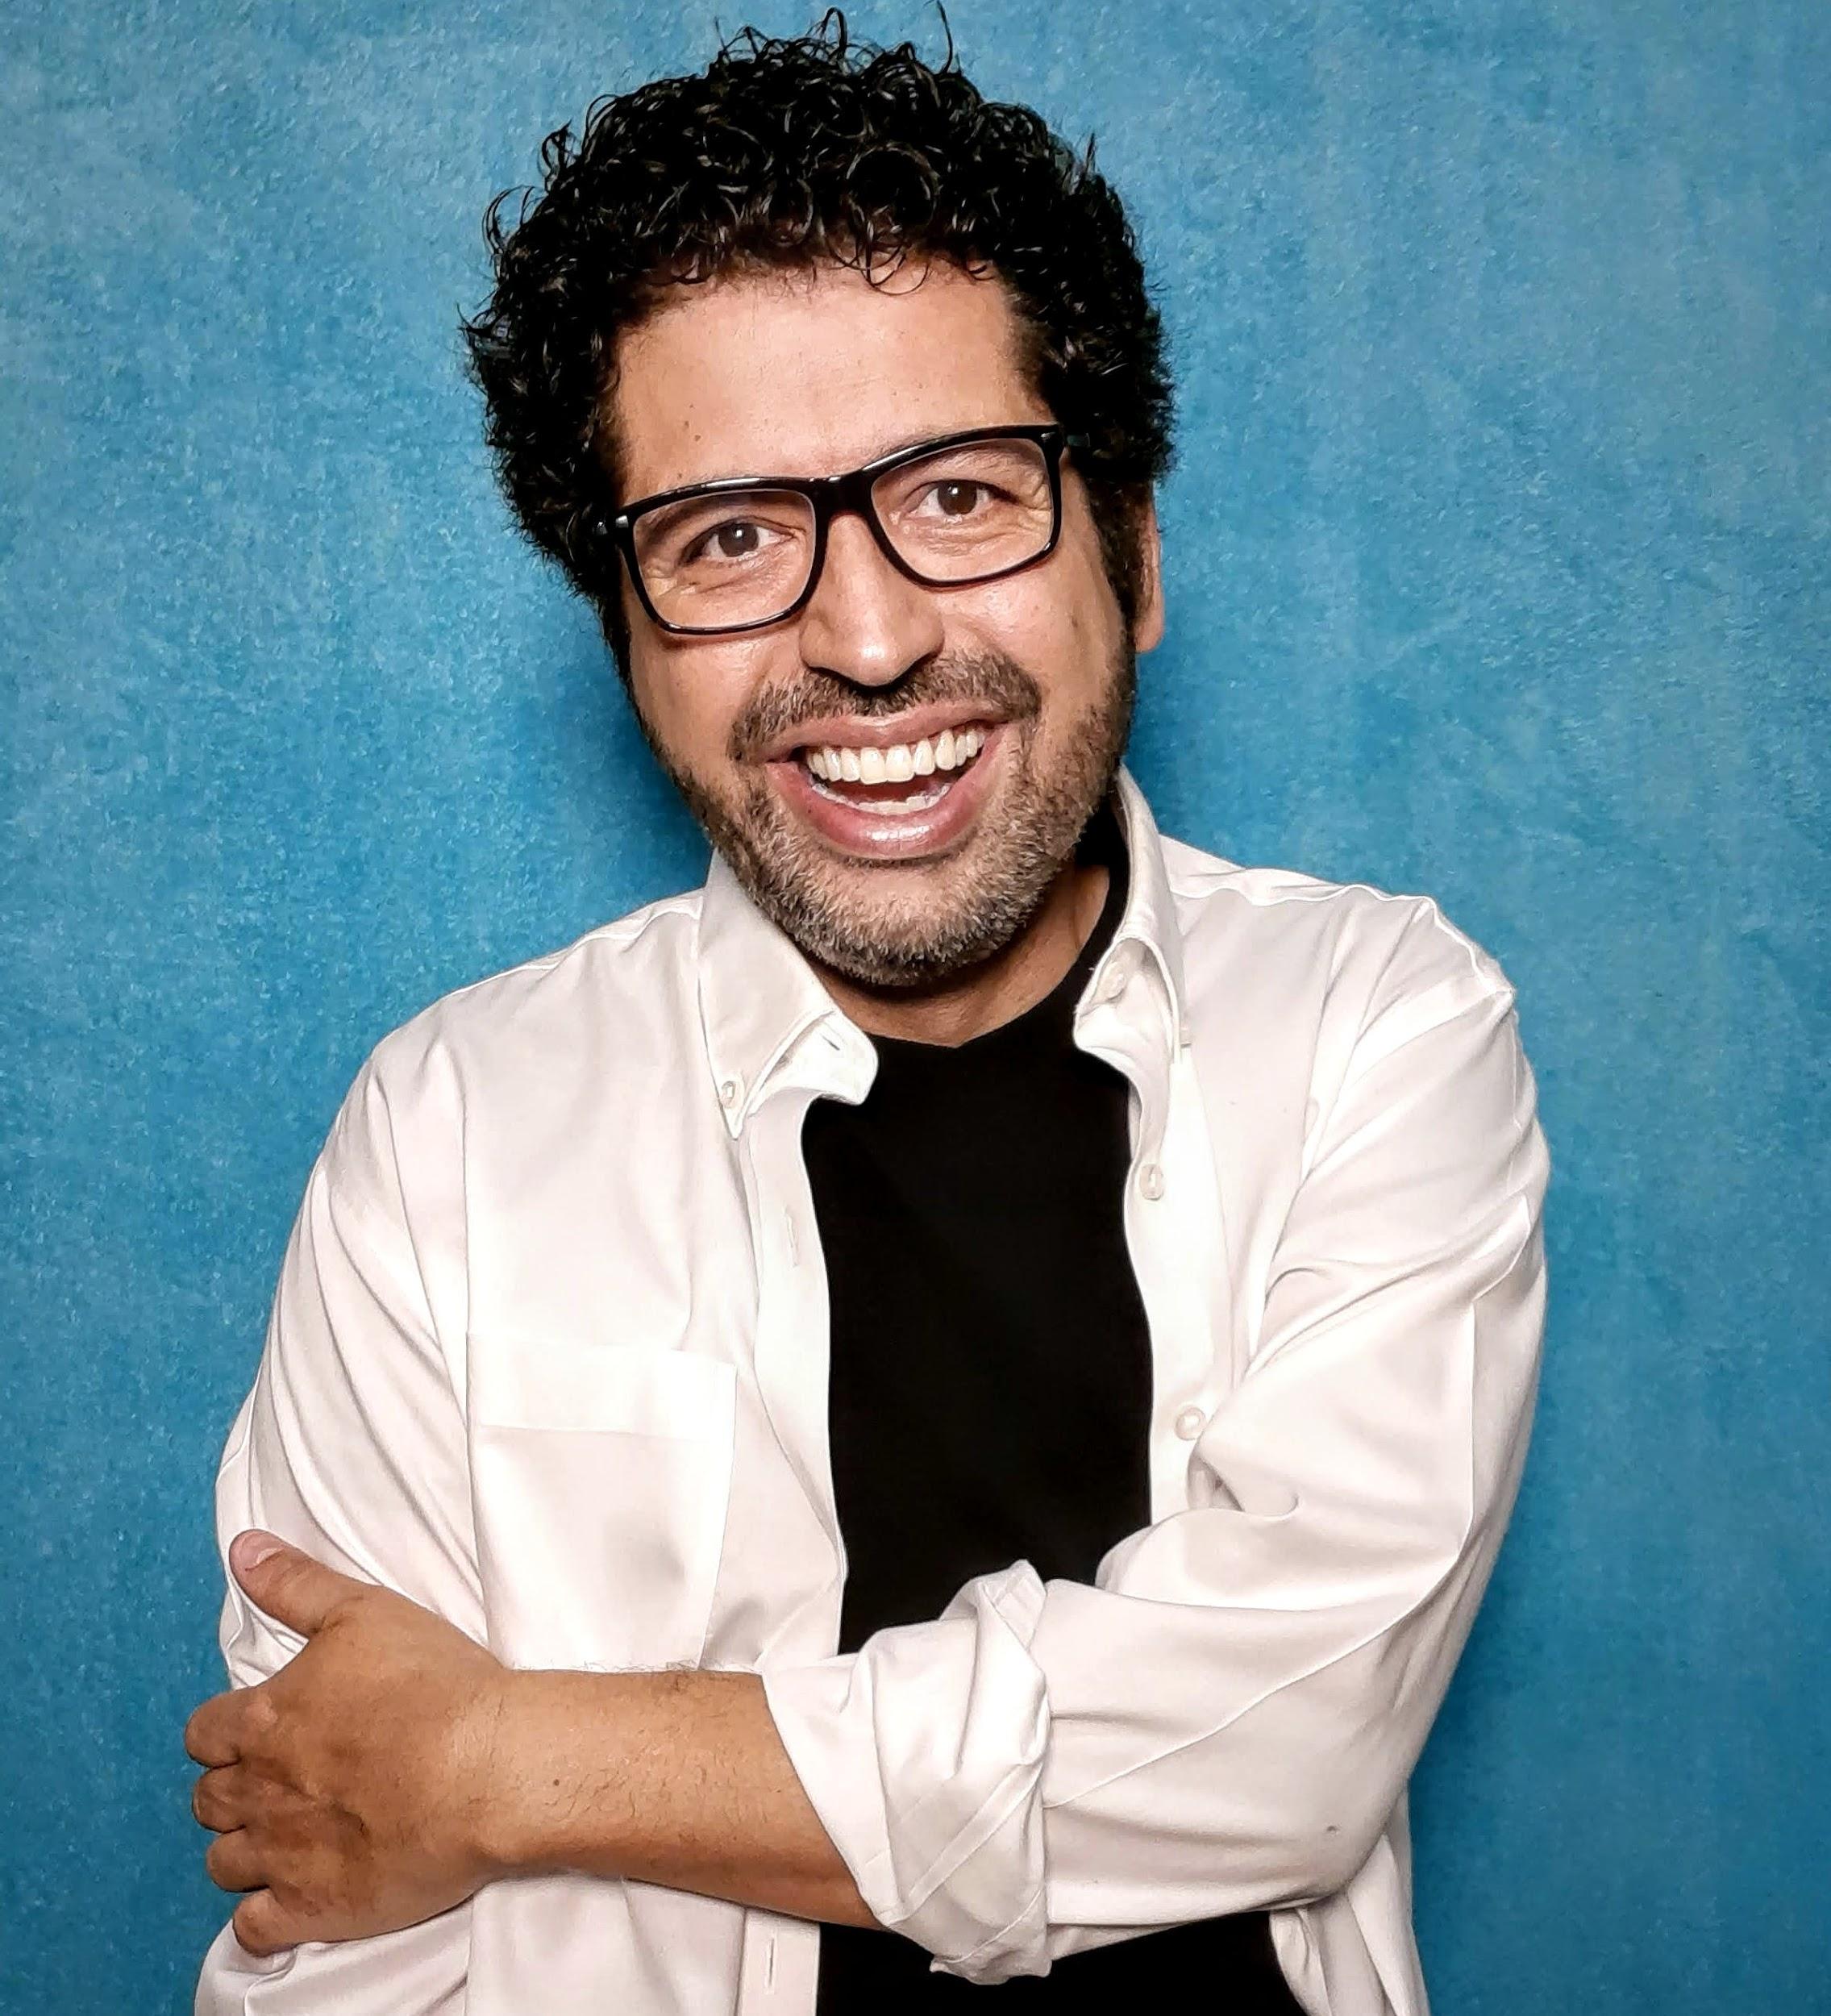 Portrait of Juan smiling at the camera in front of a blue background, wearing black glasses and a black tee with an open white collared shirt over top.